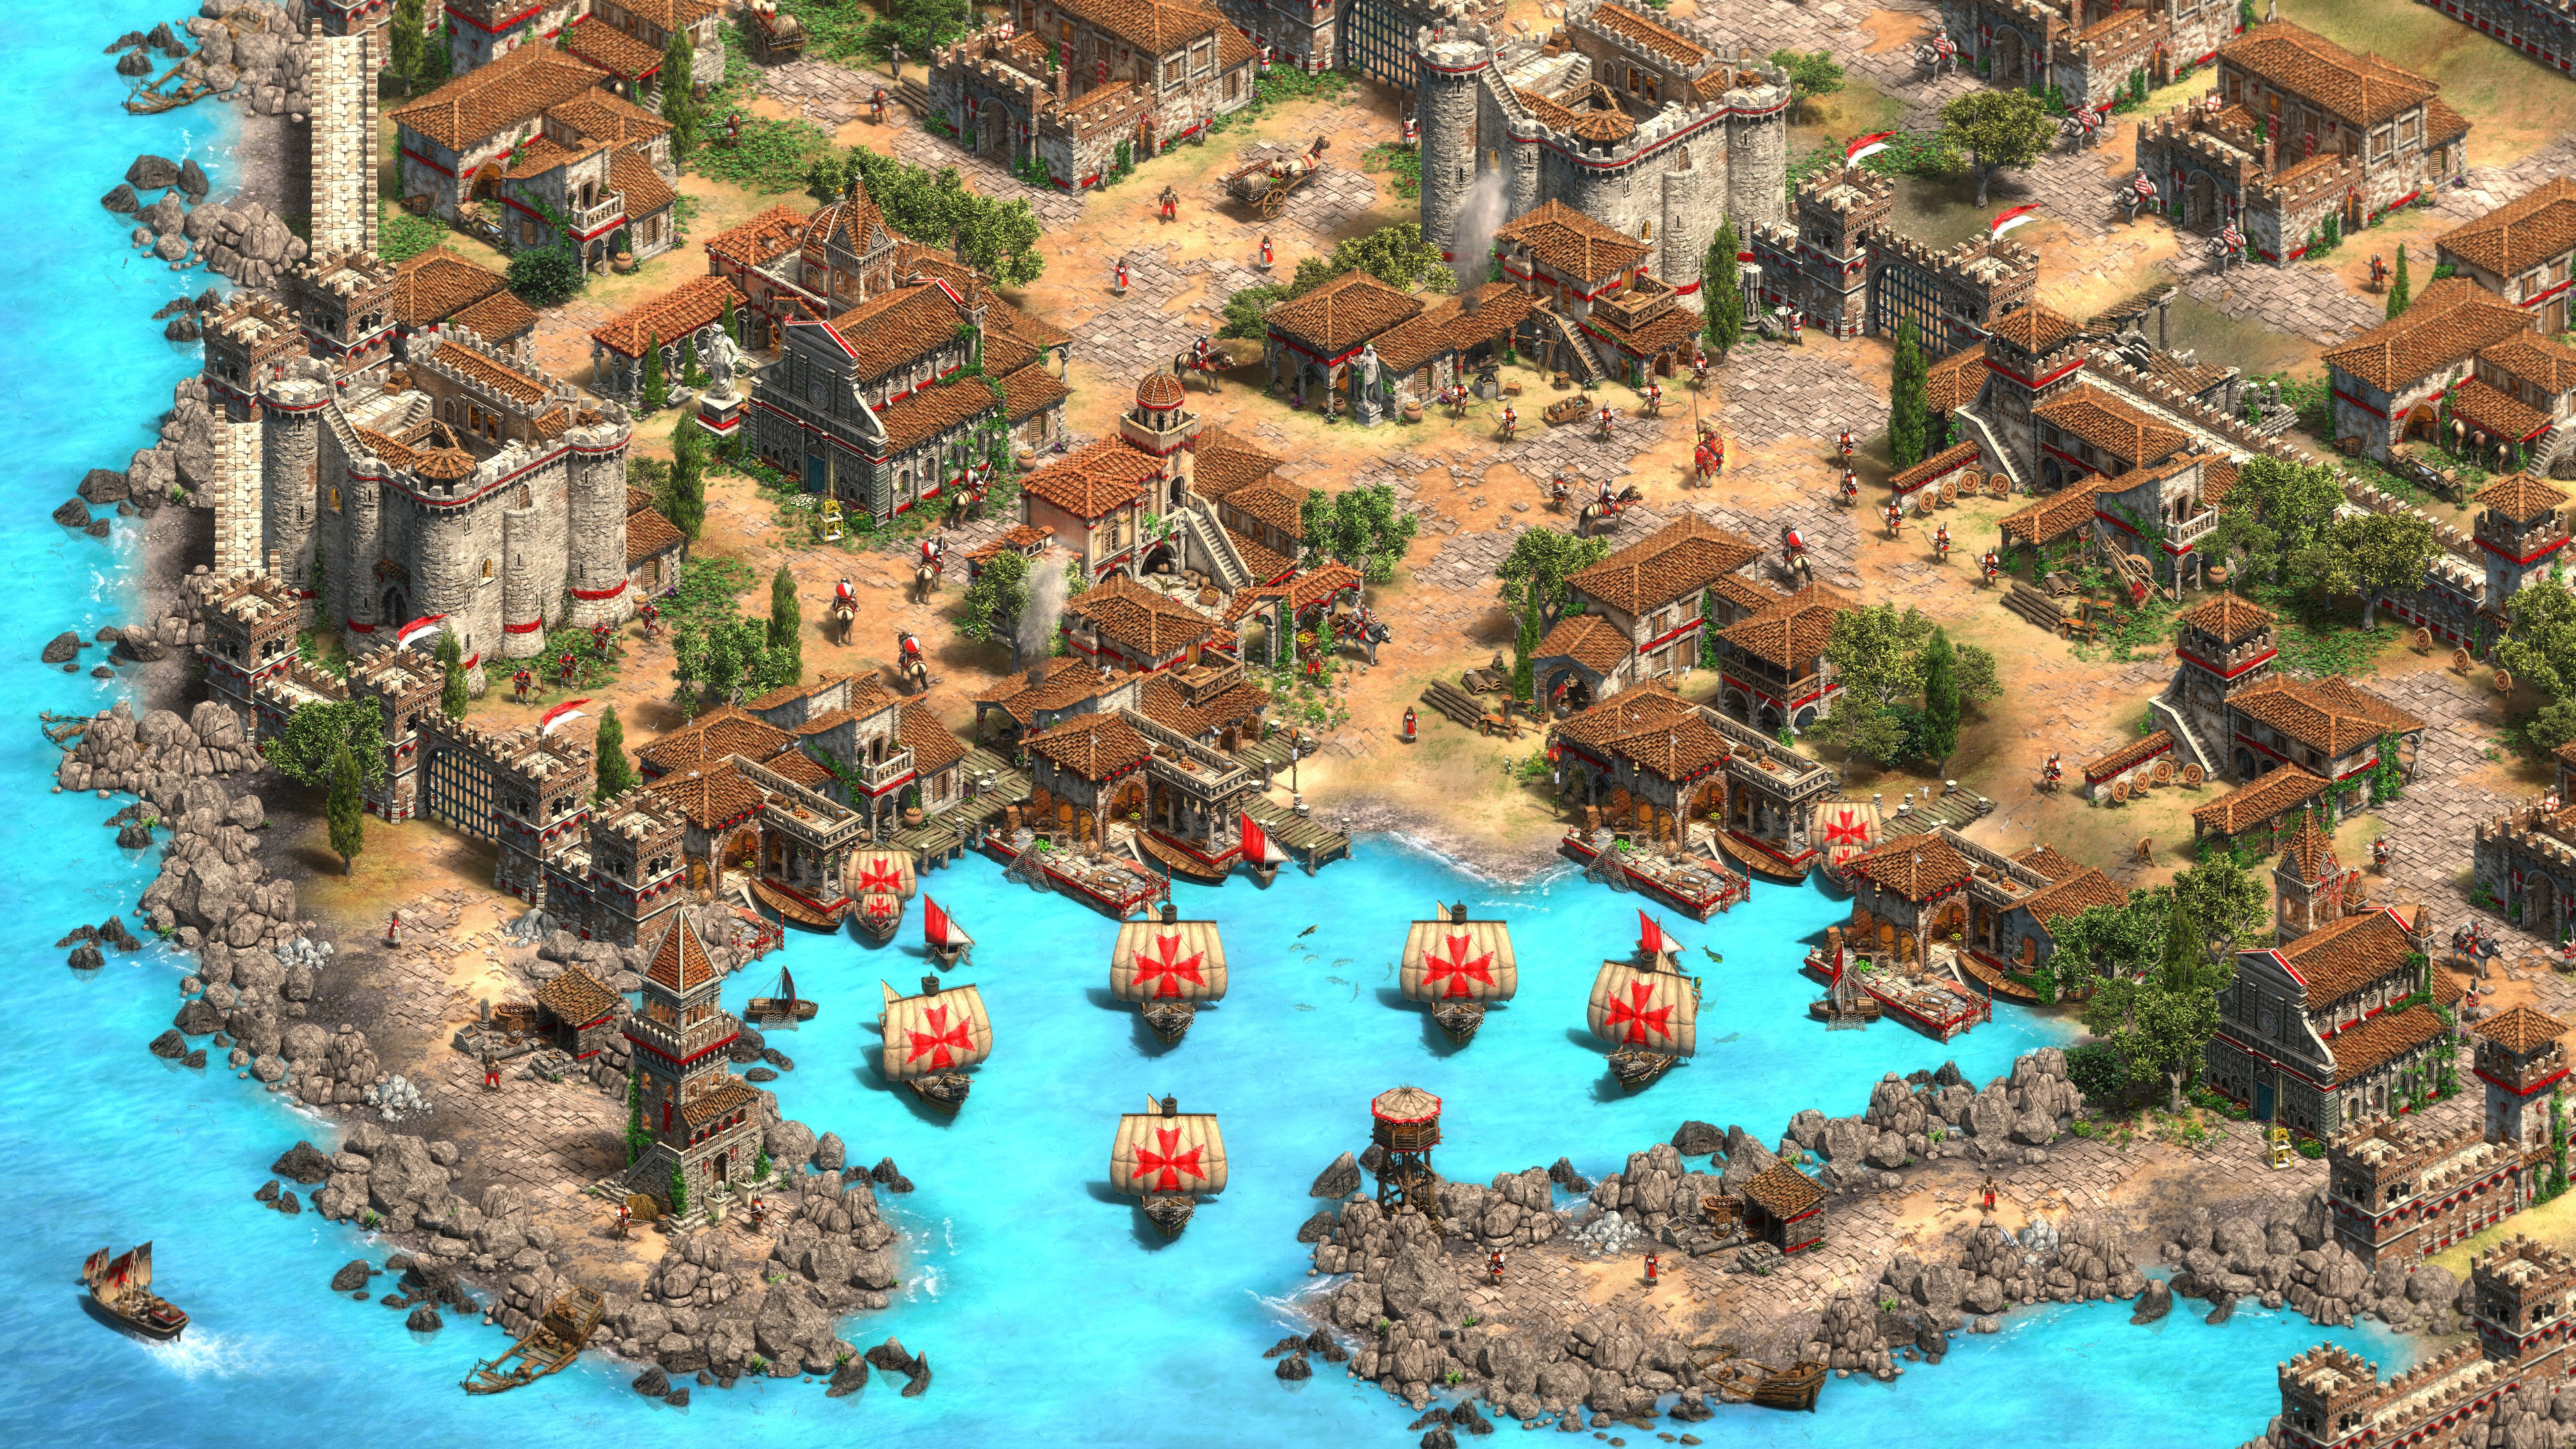 Age of Empires II: Definitive Edition - Lords of the West screenshot 52467